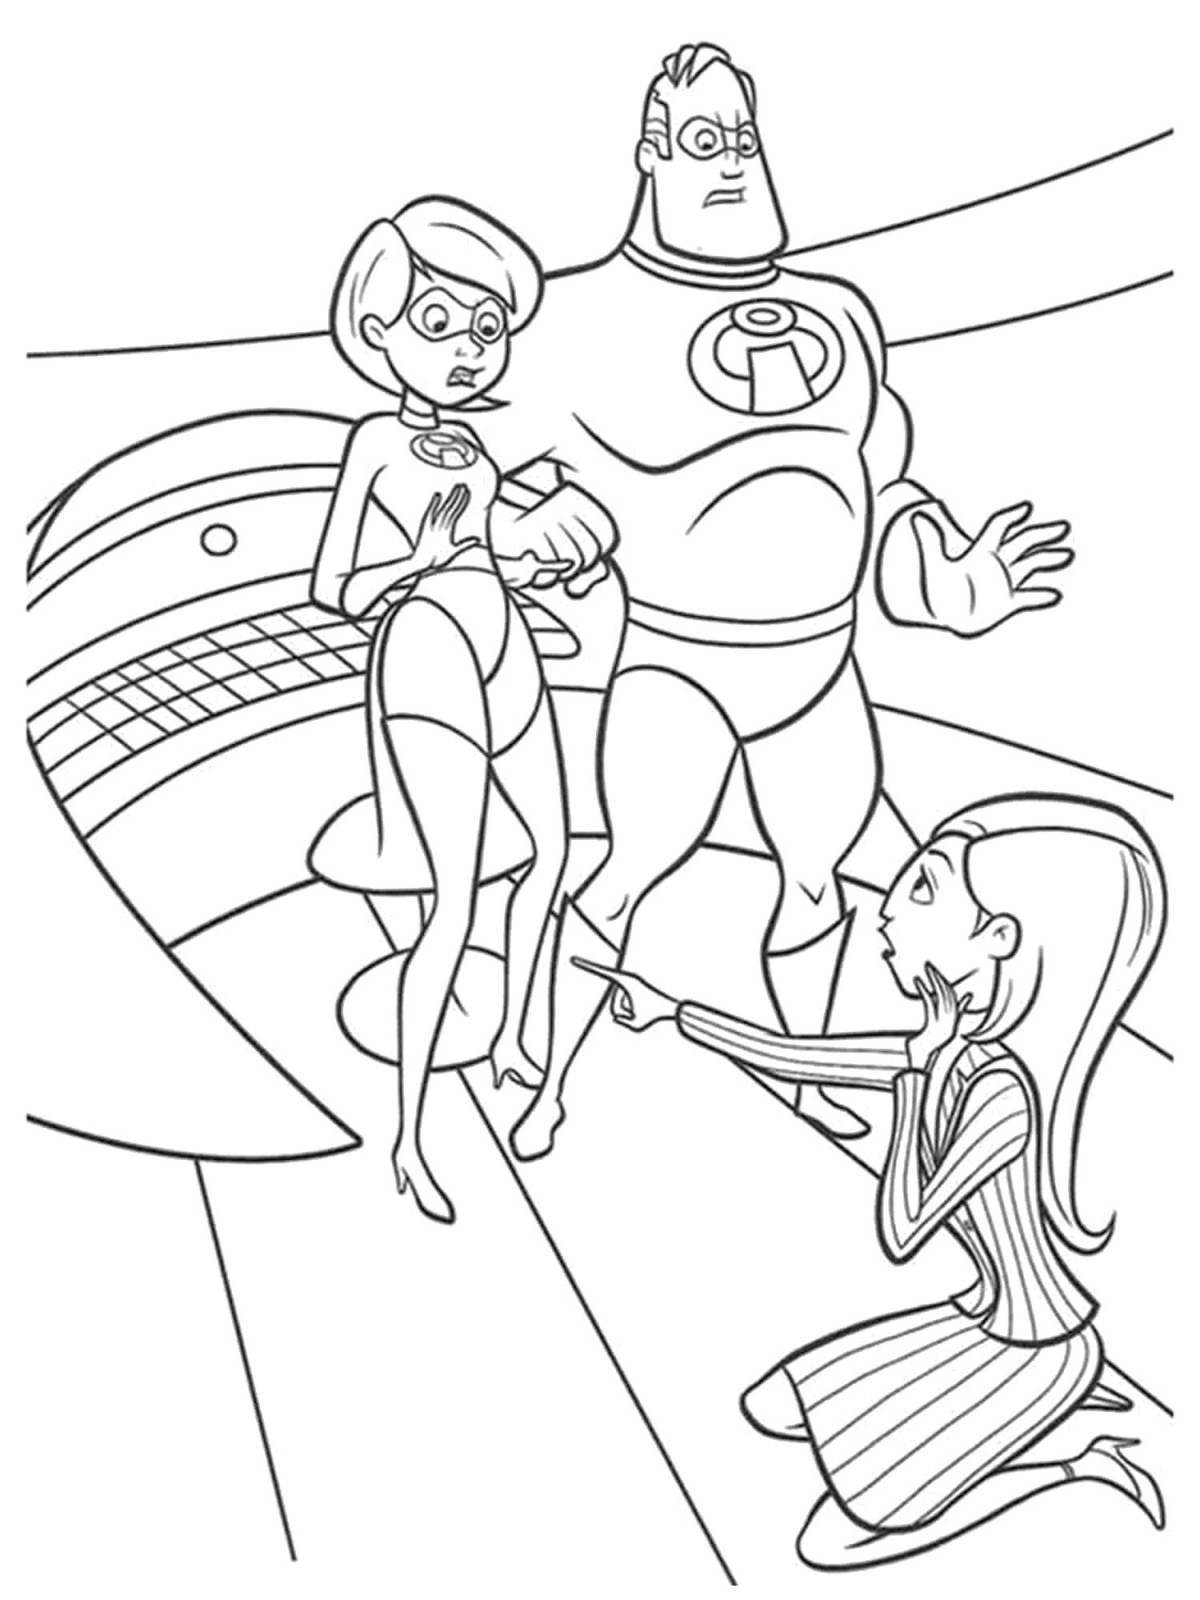 The Incredibles coloring book for kids